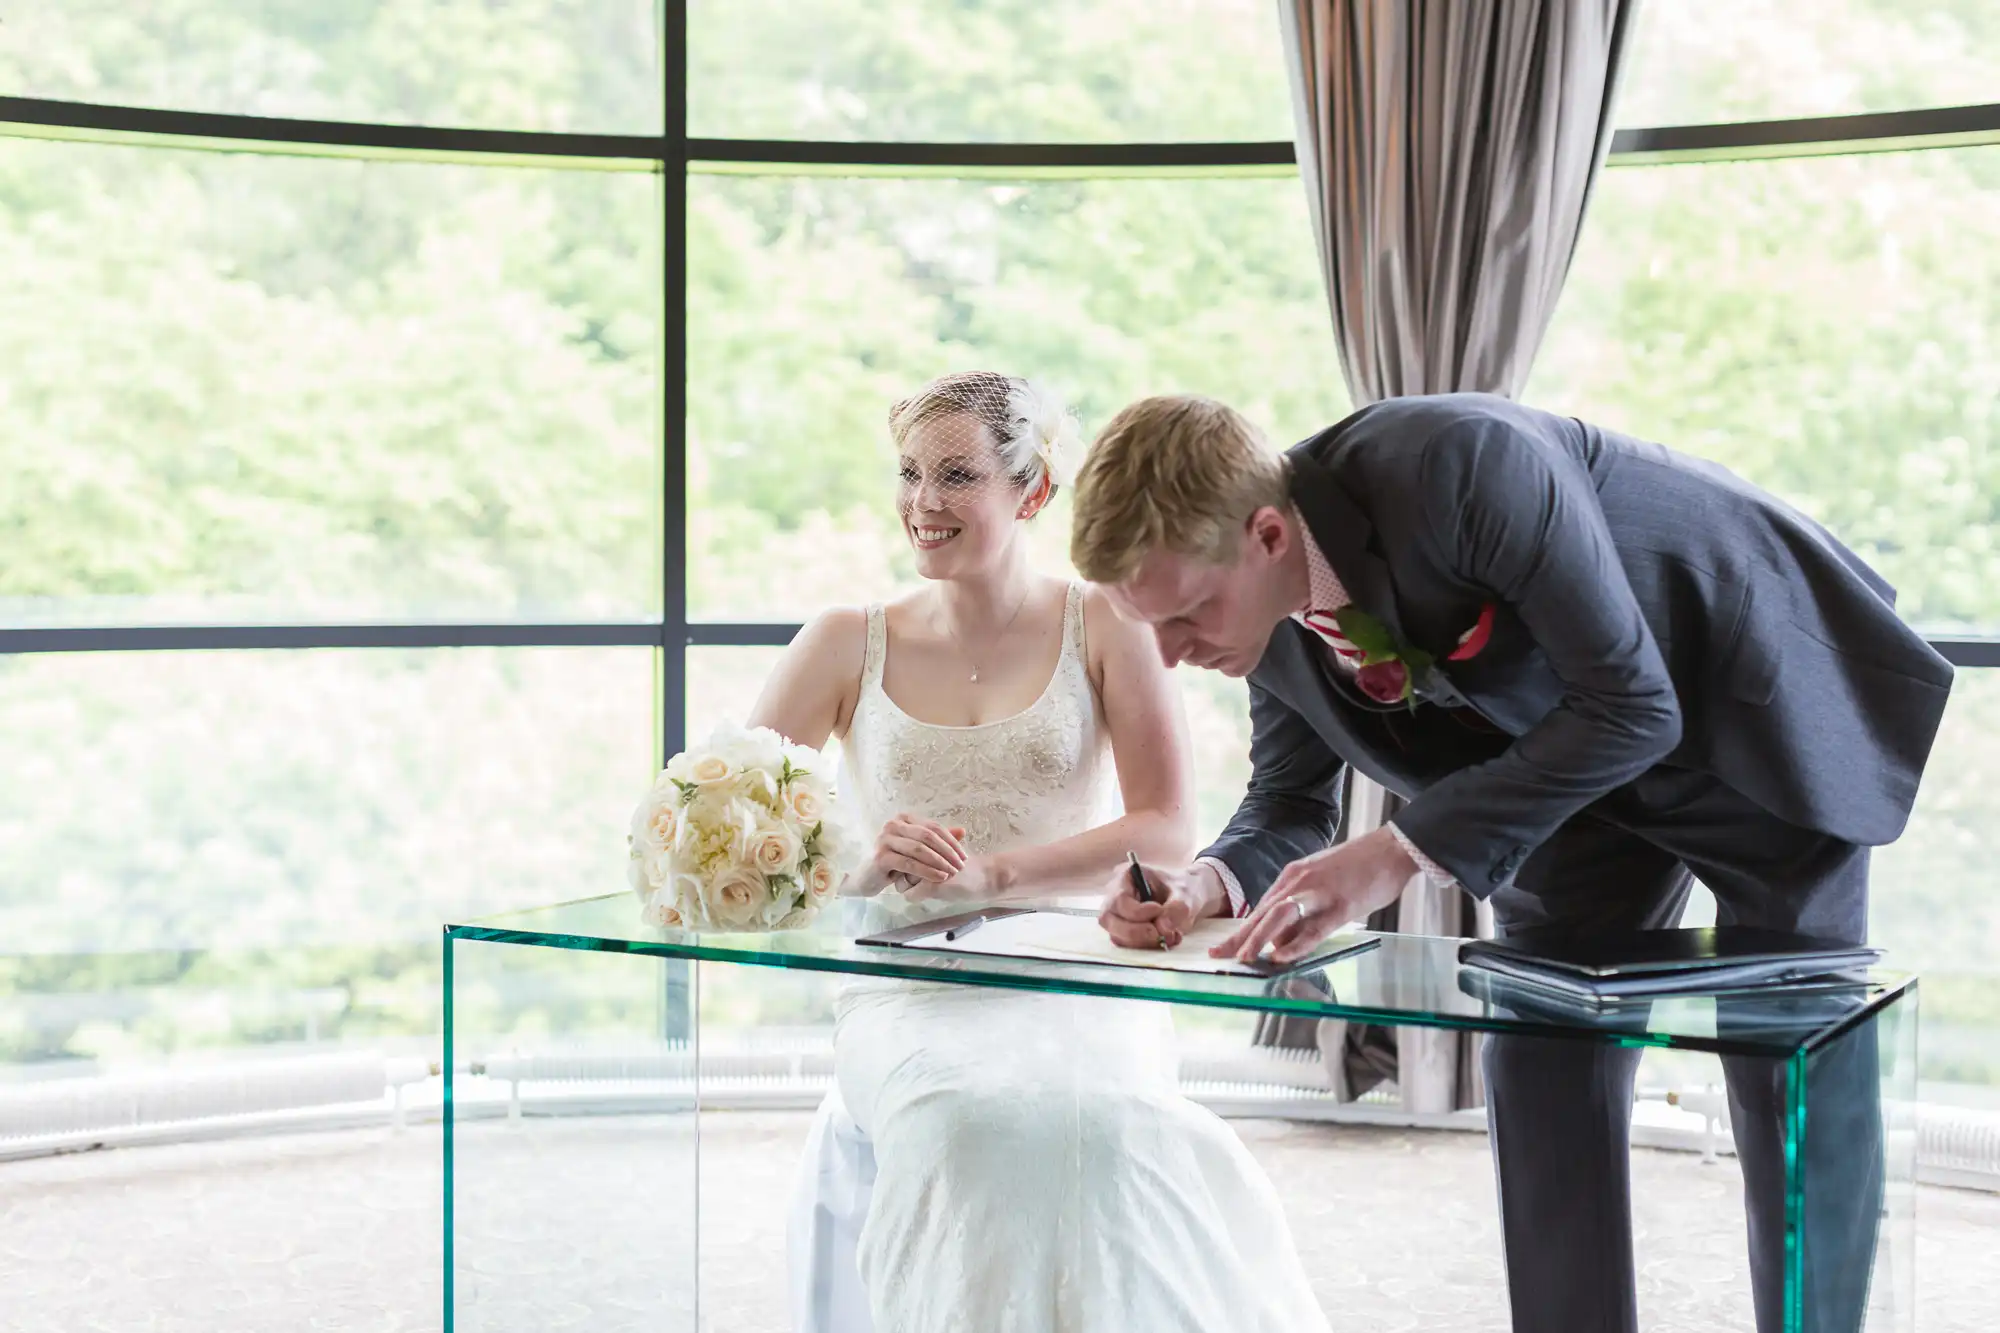 A bride sitting and smiling at the camera as the groom signs a document at a table during a wedding ceremony, with large windows and greenery outside.